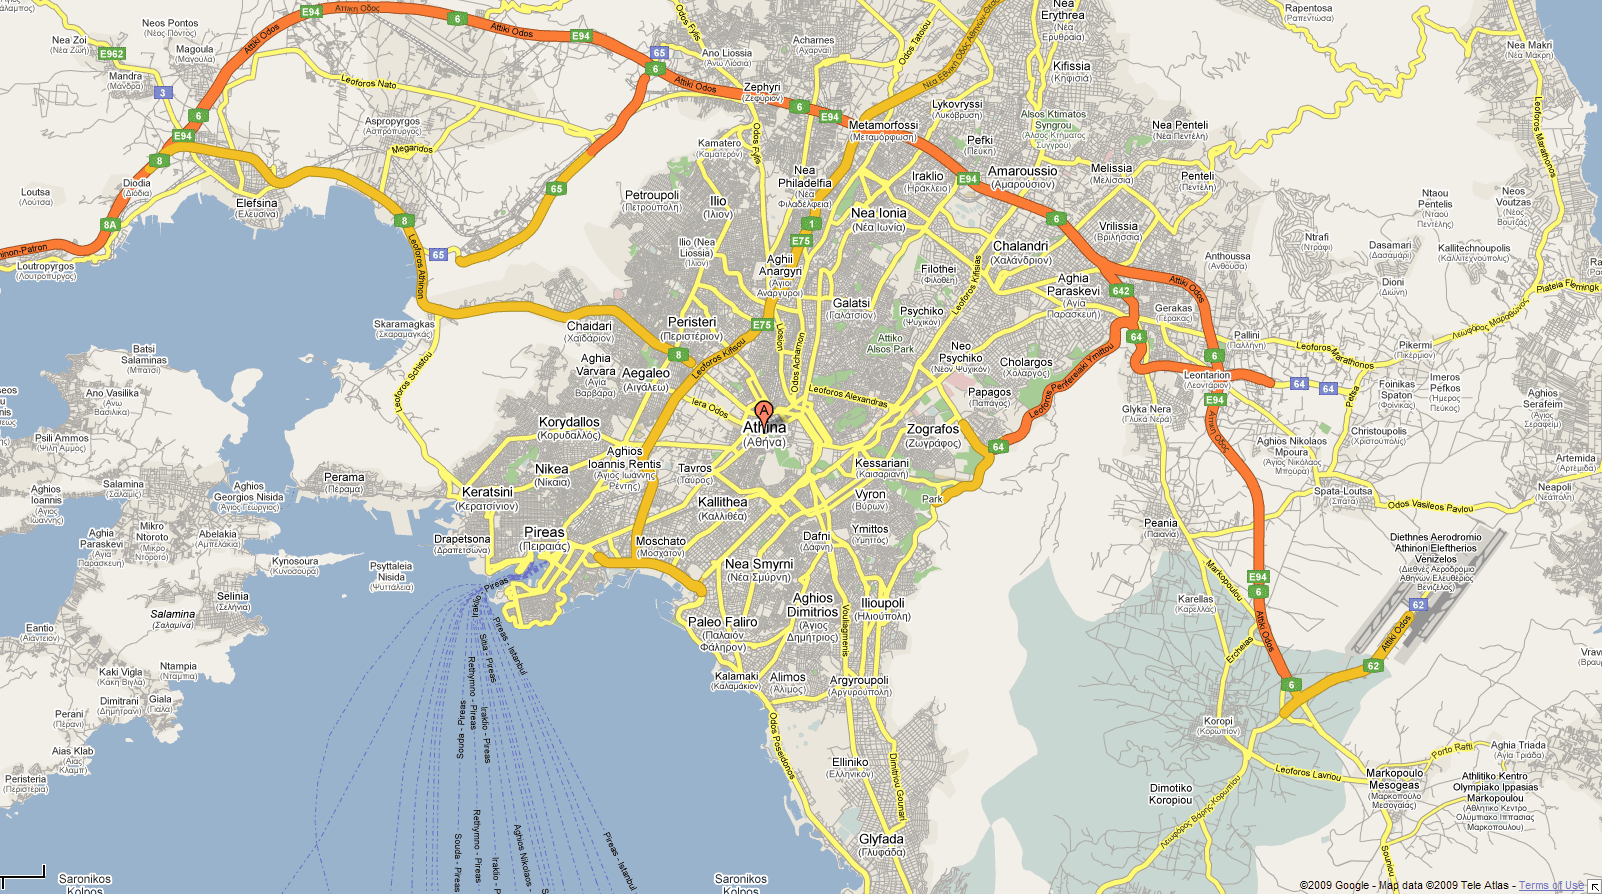 Maps of Athens | Maps – Map of Subway, Metro Map, Map of Europe ...